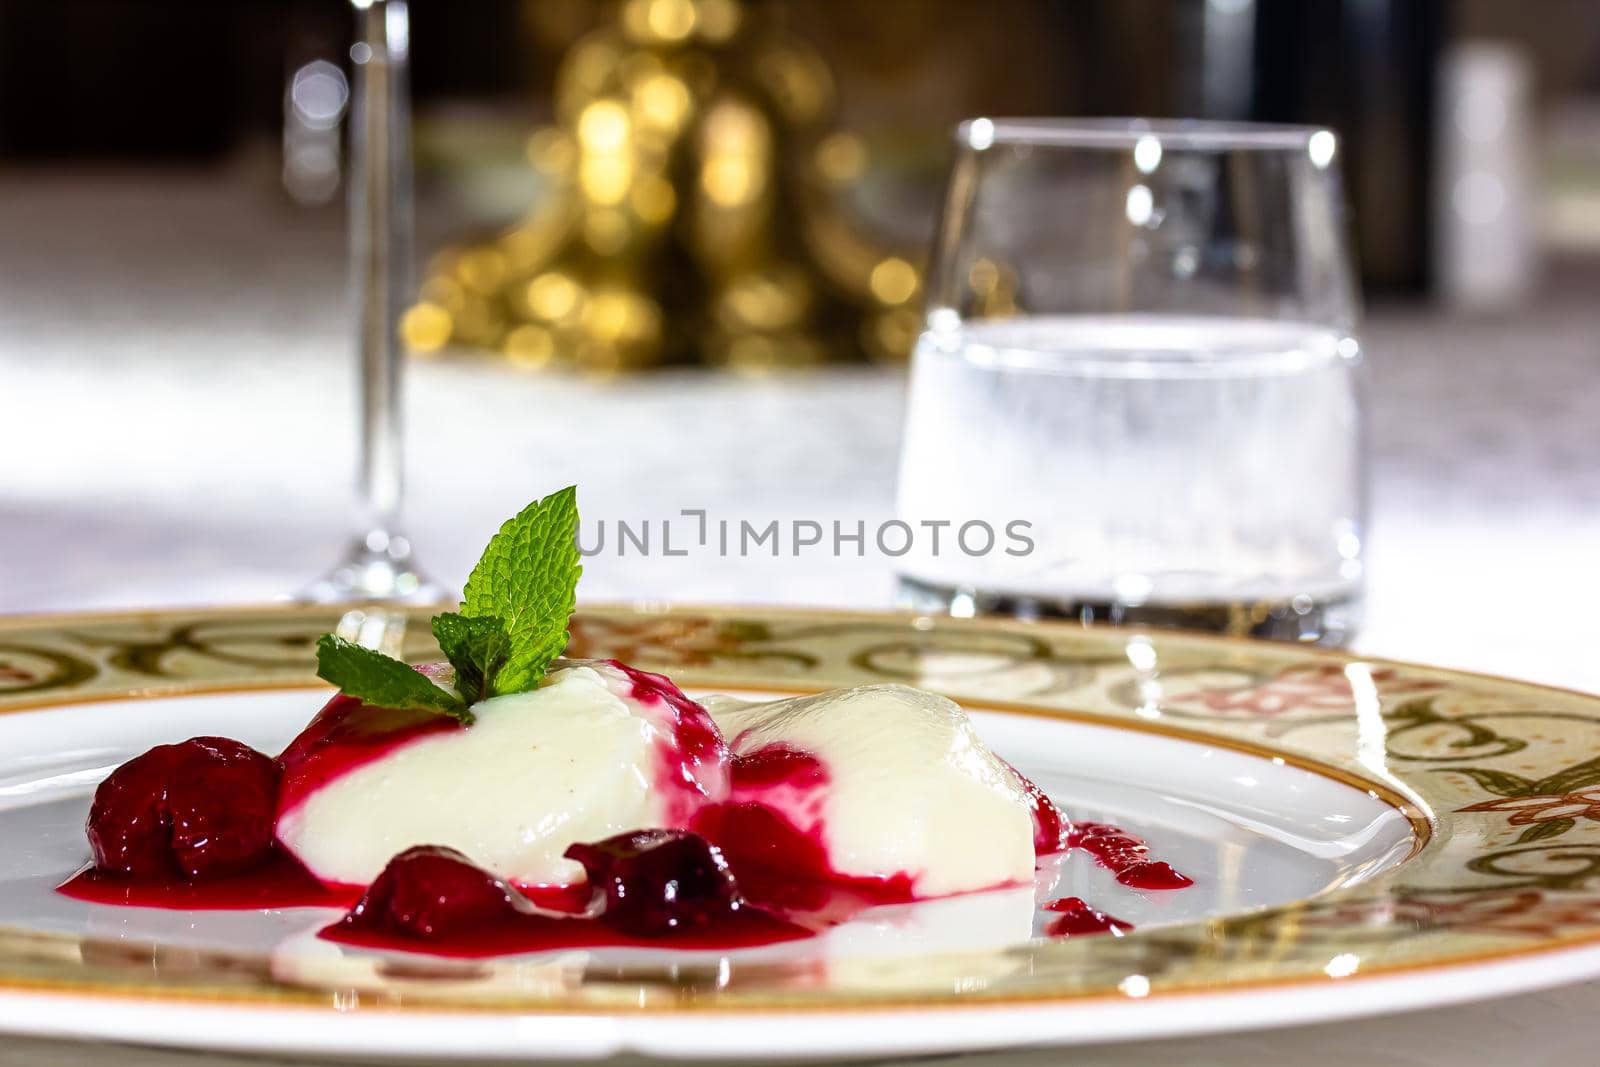 Panakota with cherry jelly and mint leaves on a white background by Milanchikov